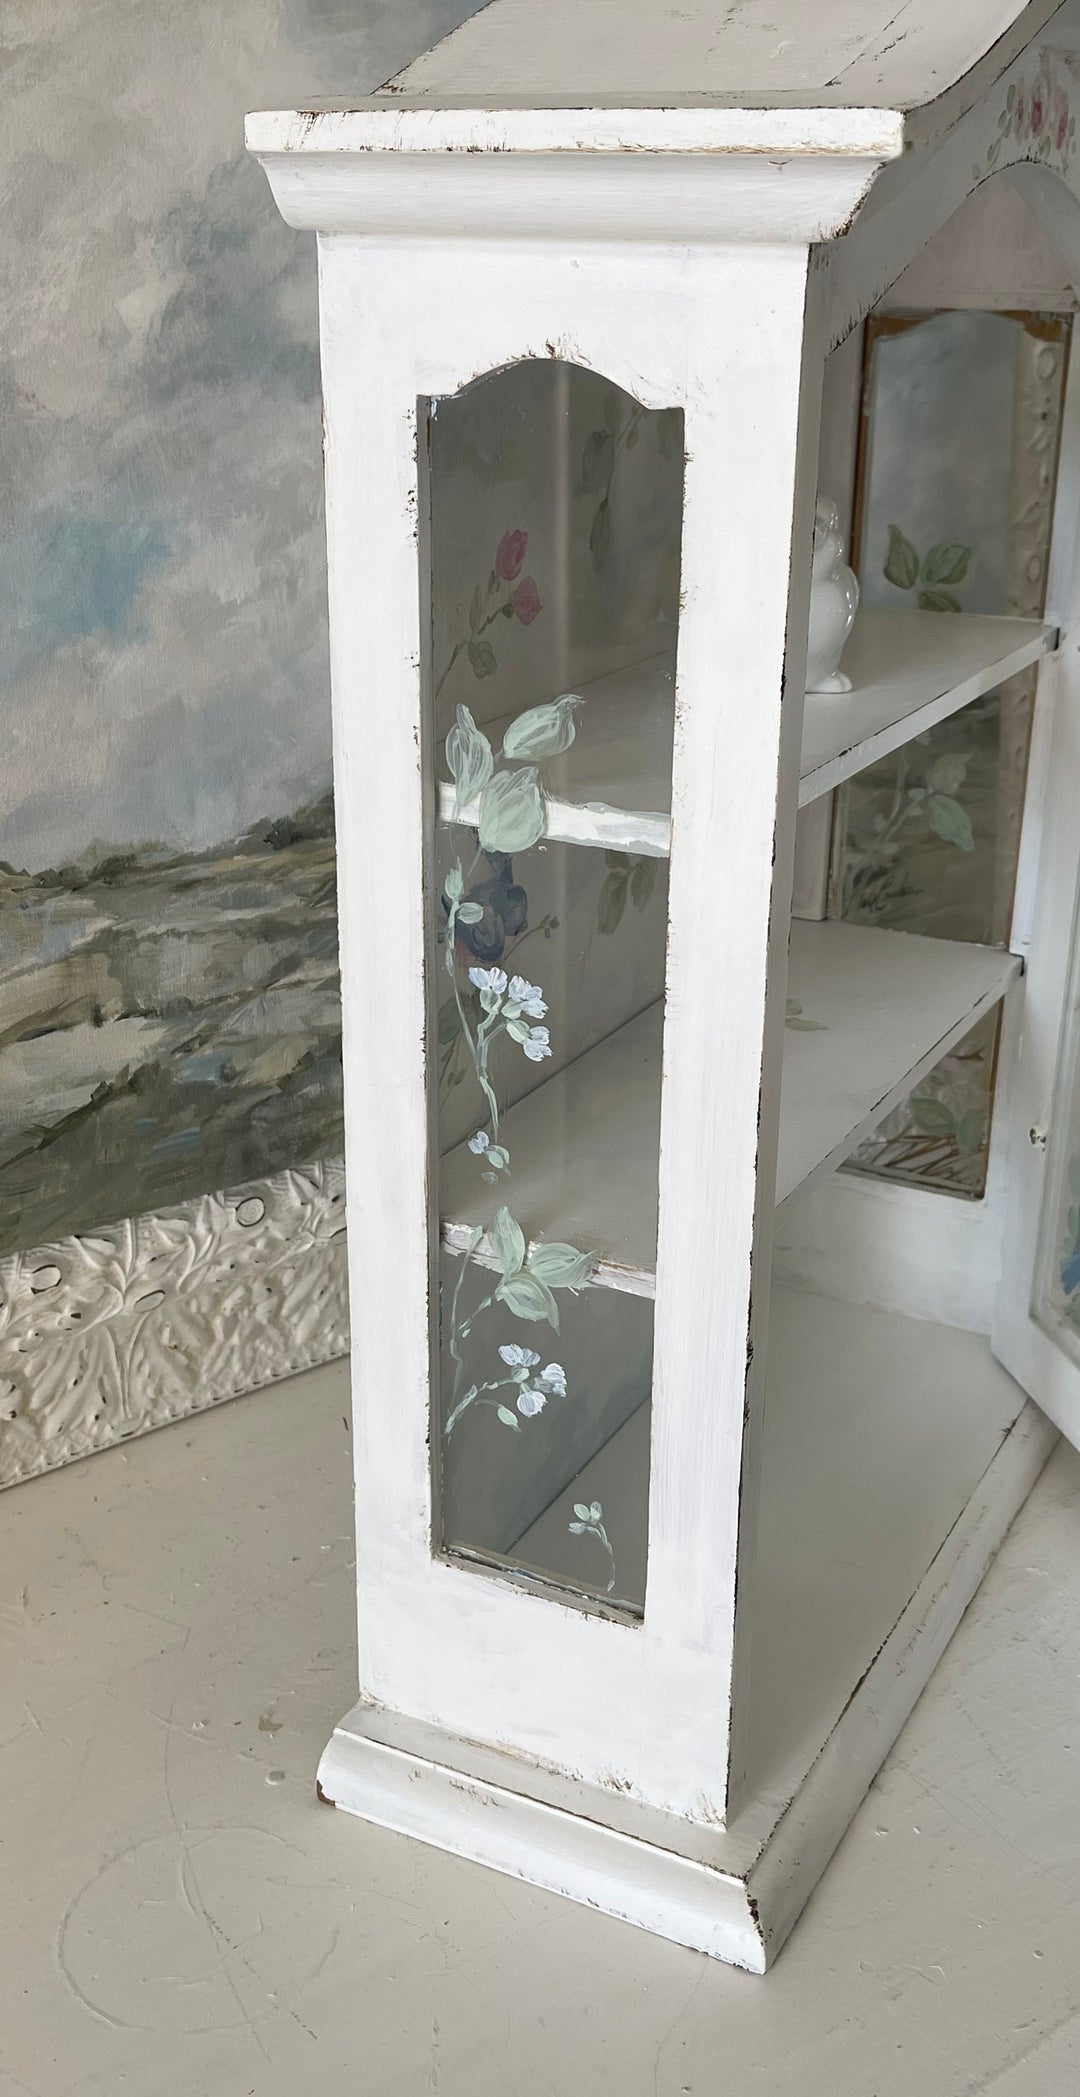 Shabby Chic Vintage Bluebird and Roses Wood Cabinet Original by Debi Coules